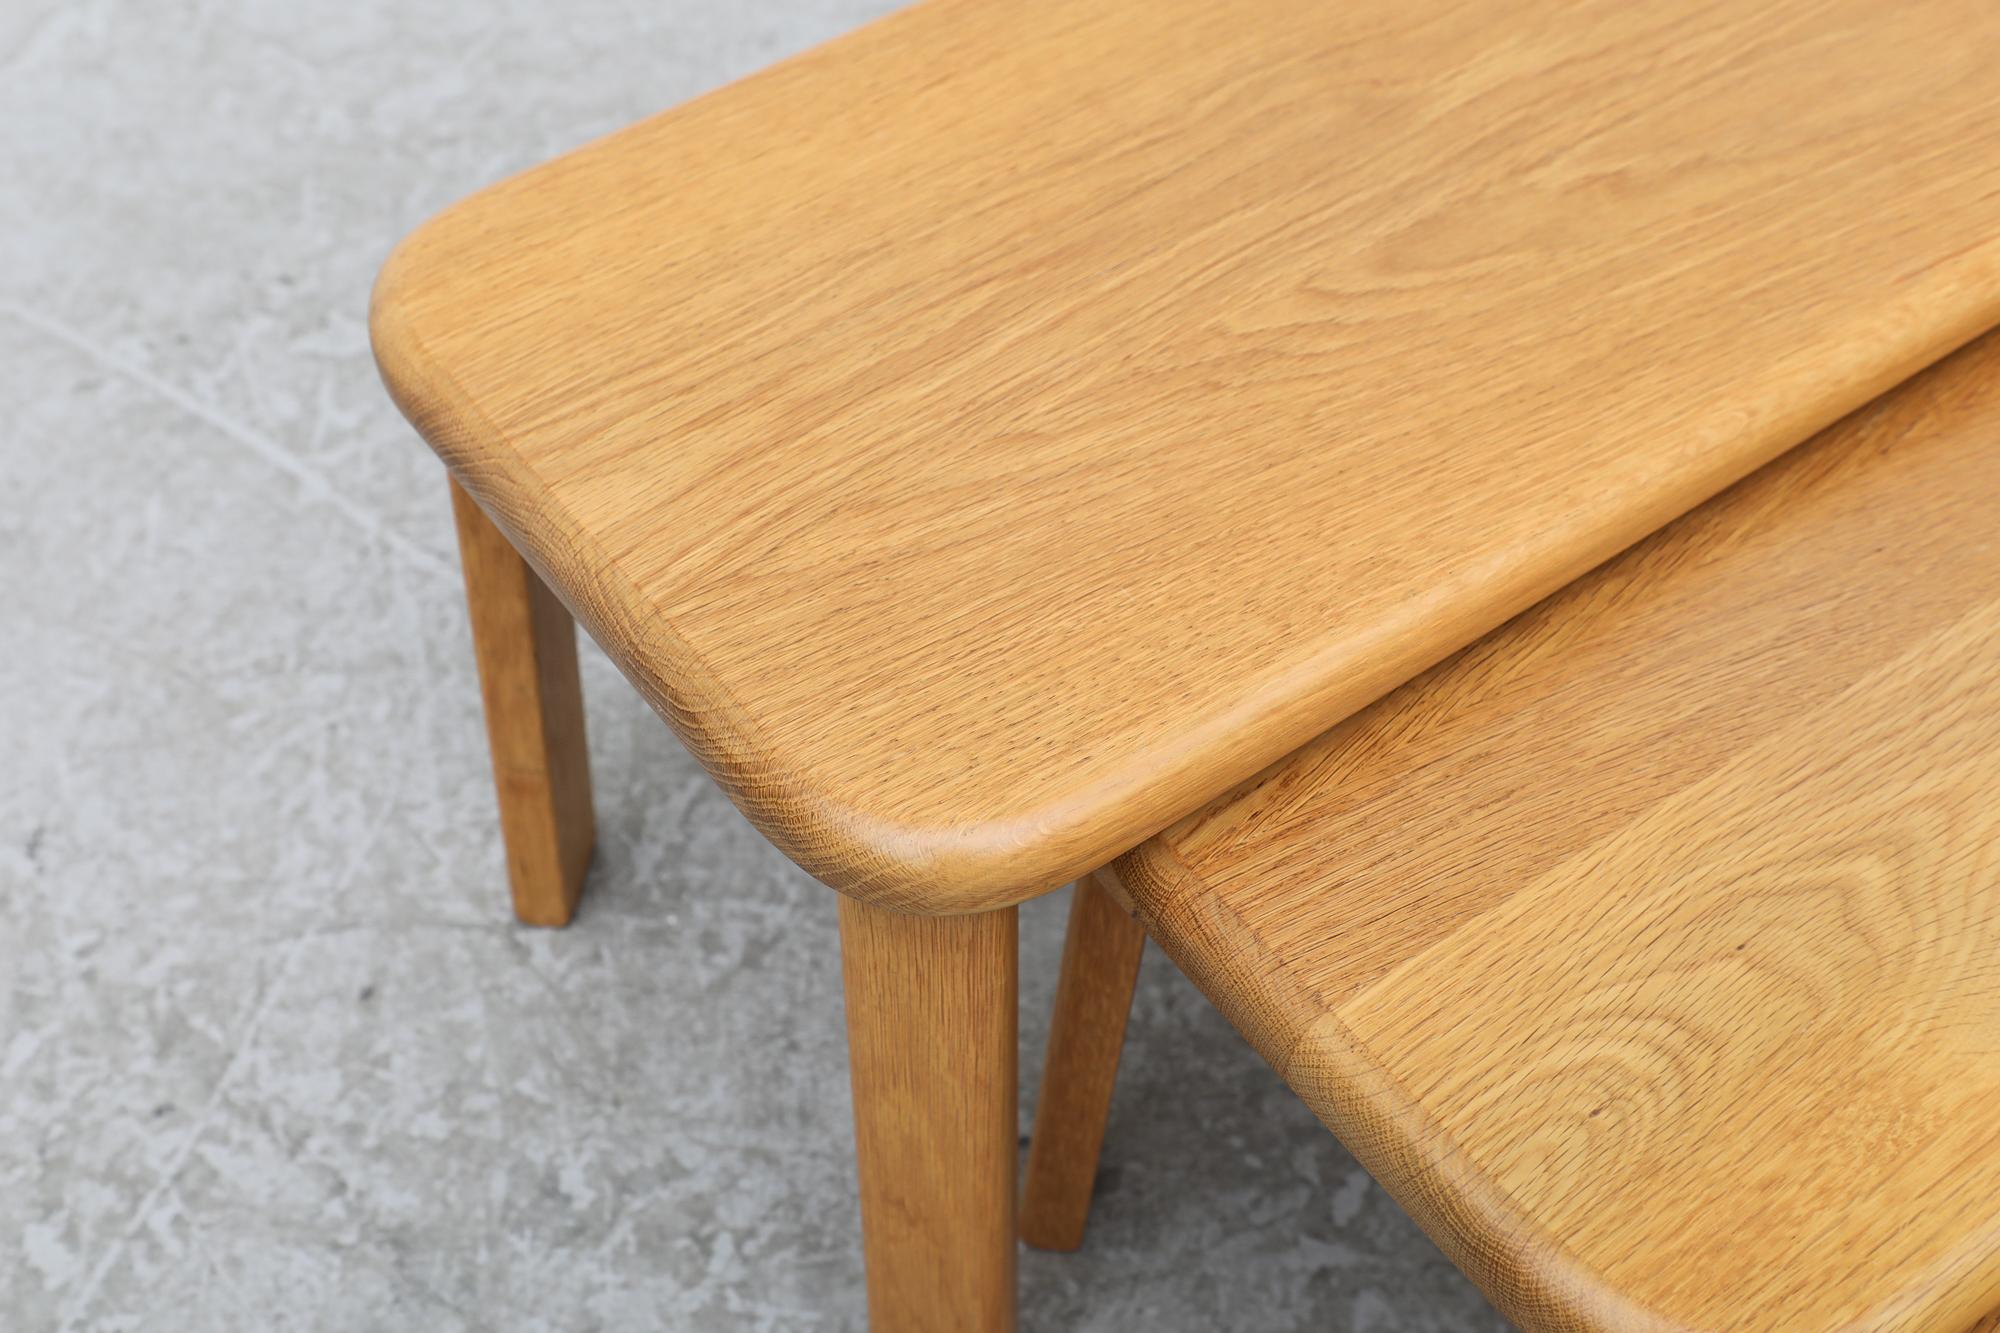 Set of 3 Charlotte Perriand Inspired Natural Oak Nesting Tables w/ Rounded Edges For Sale 7